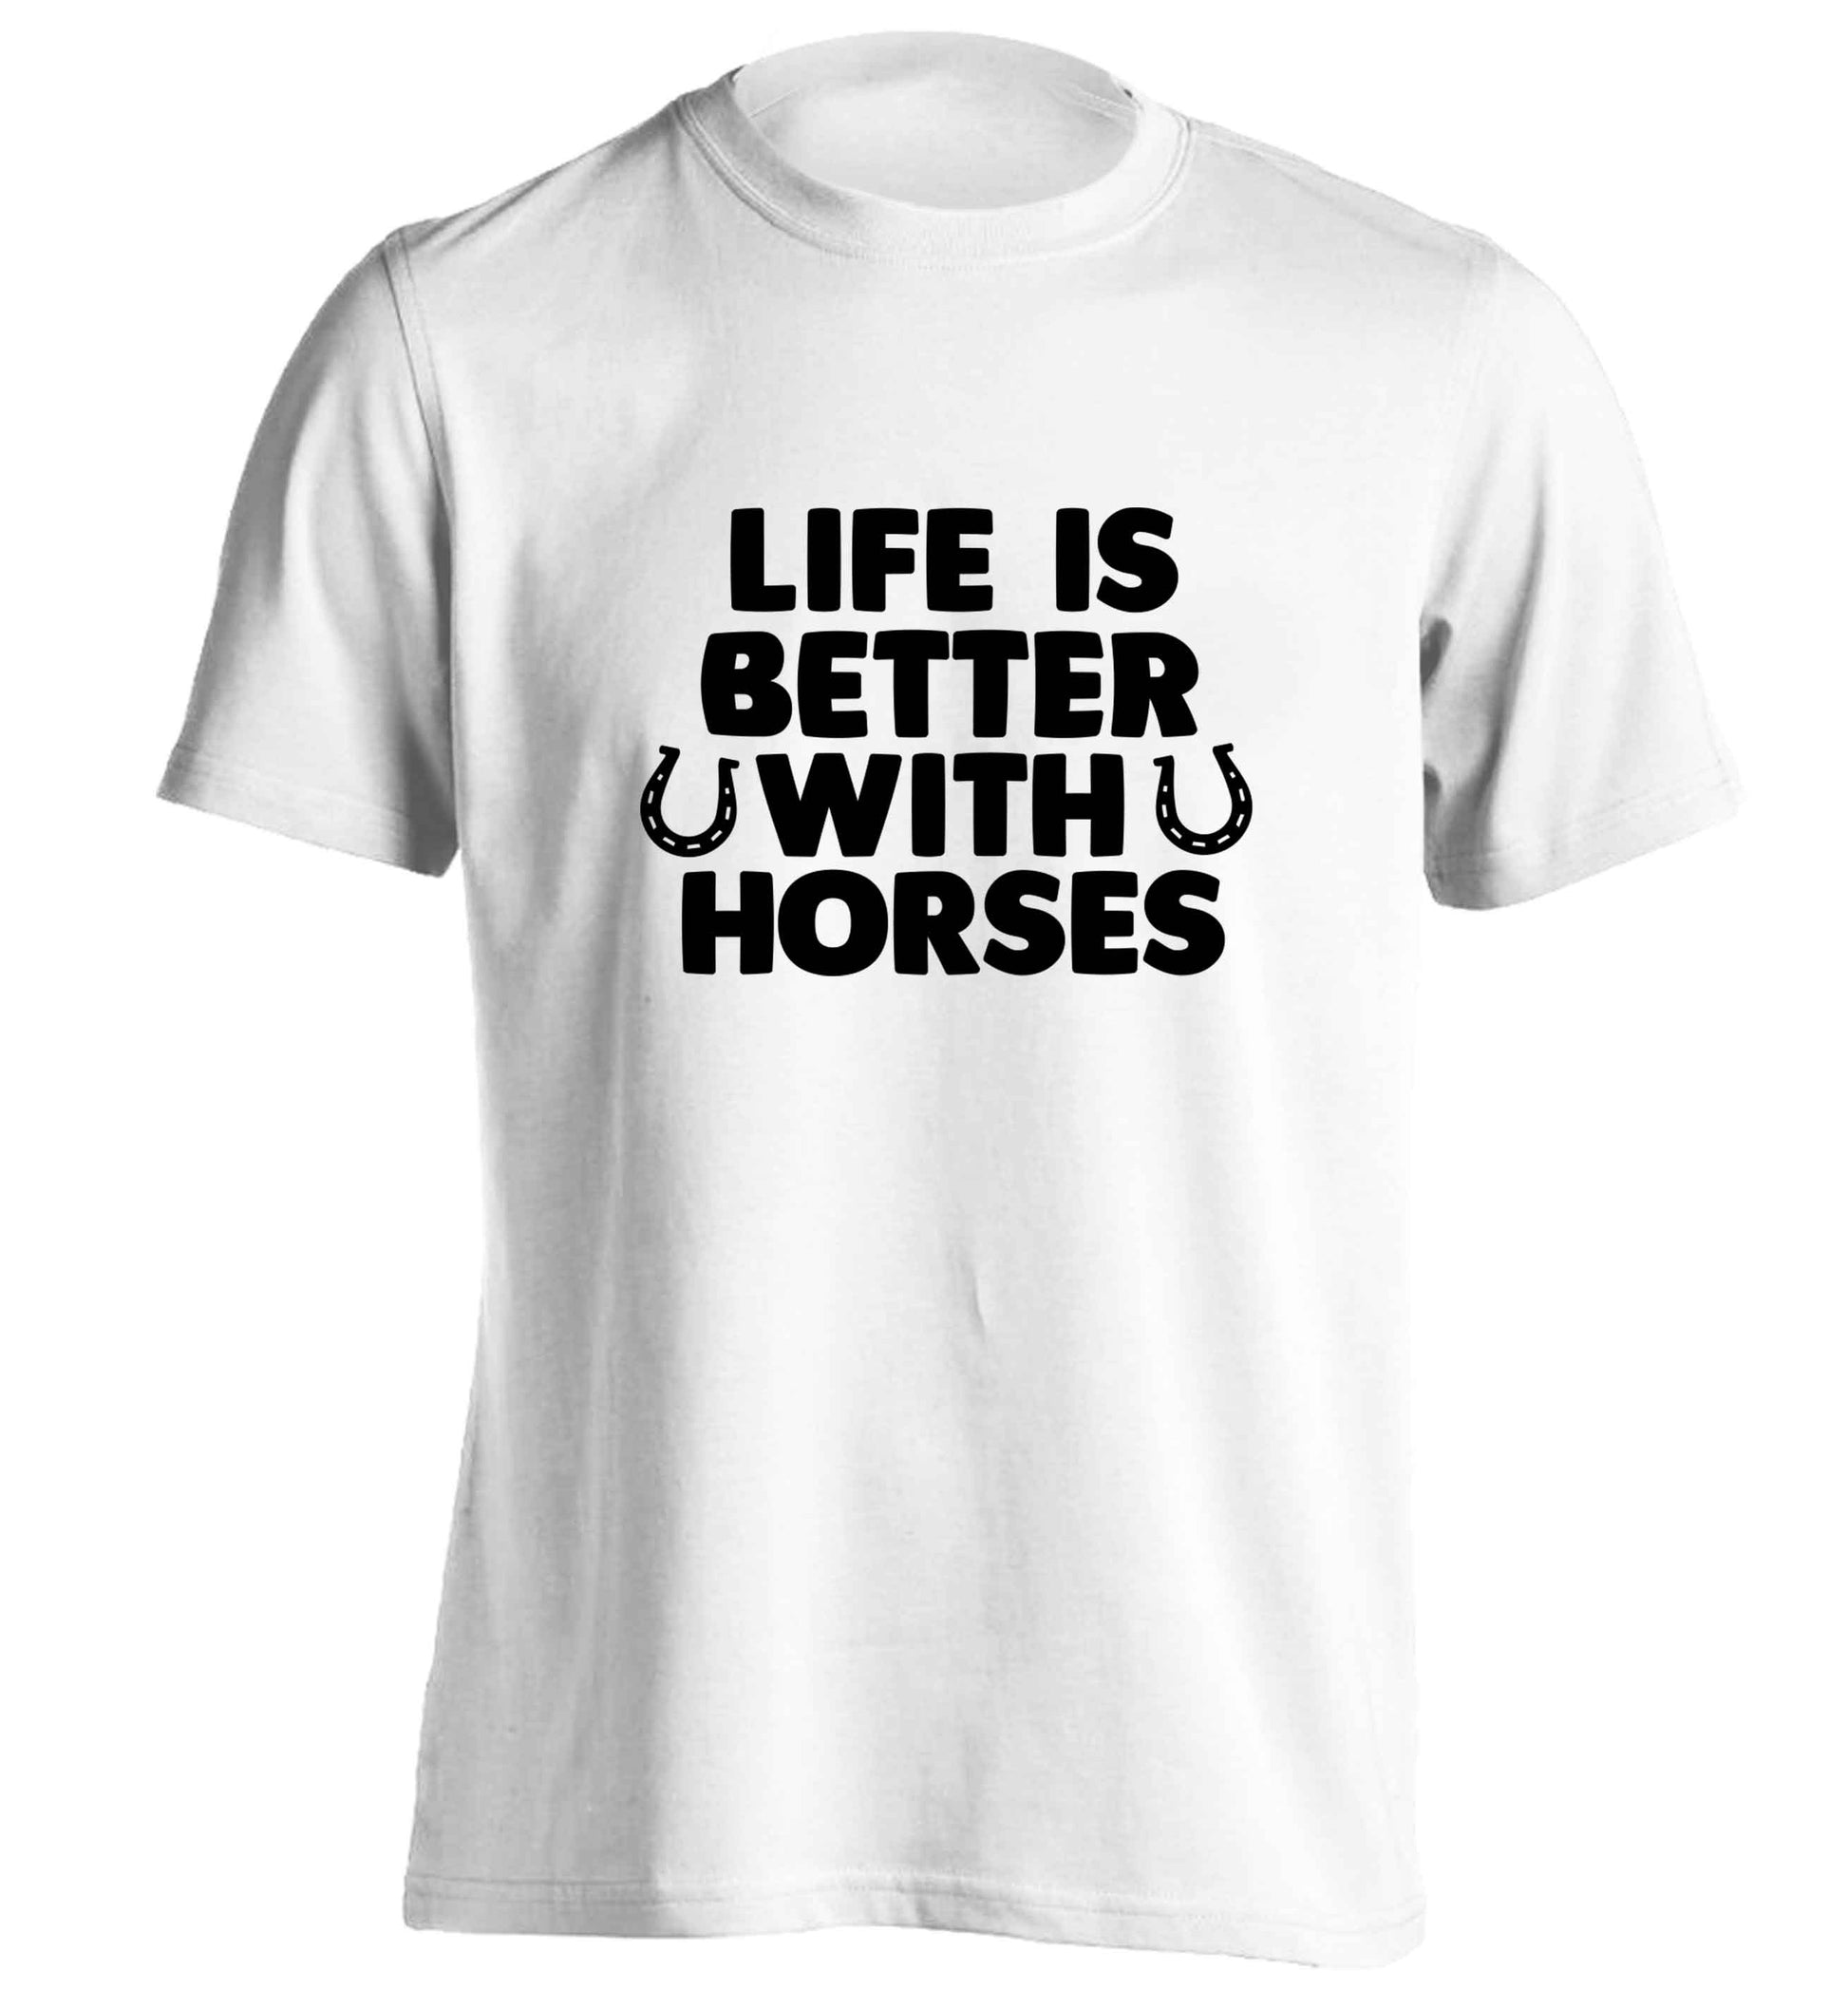 Life is better with horses adults unisex white Tshirt 2XL